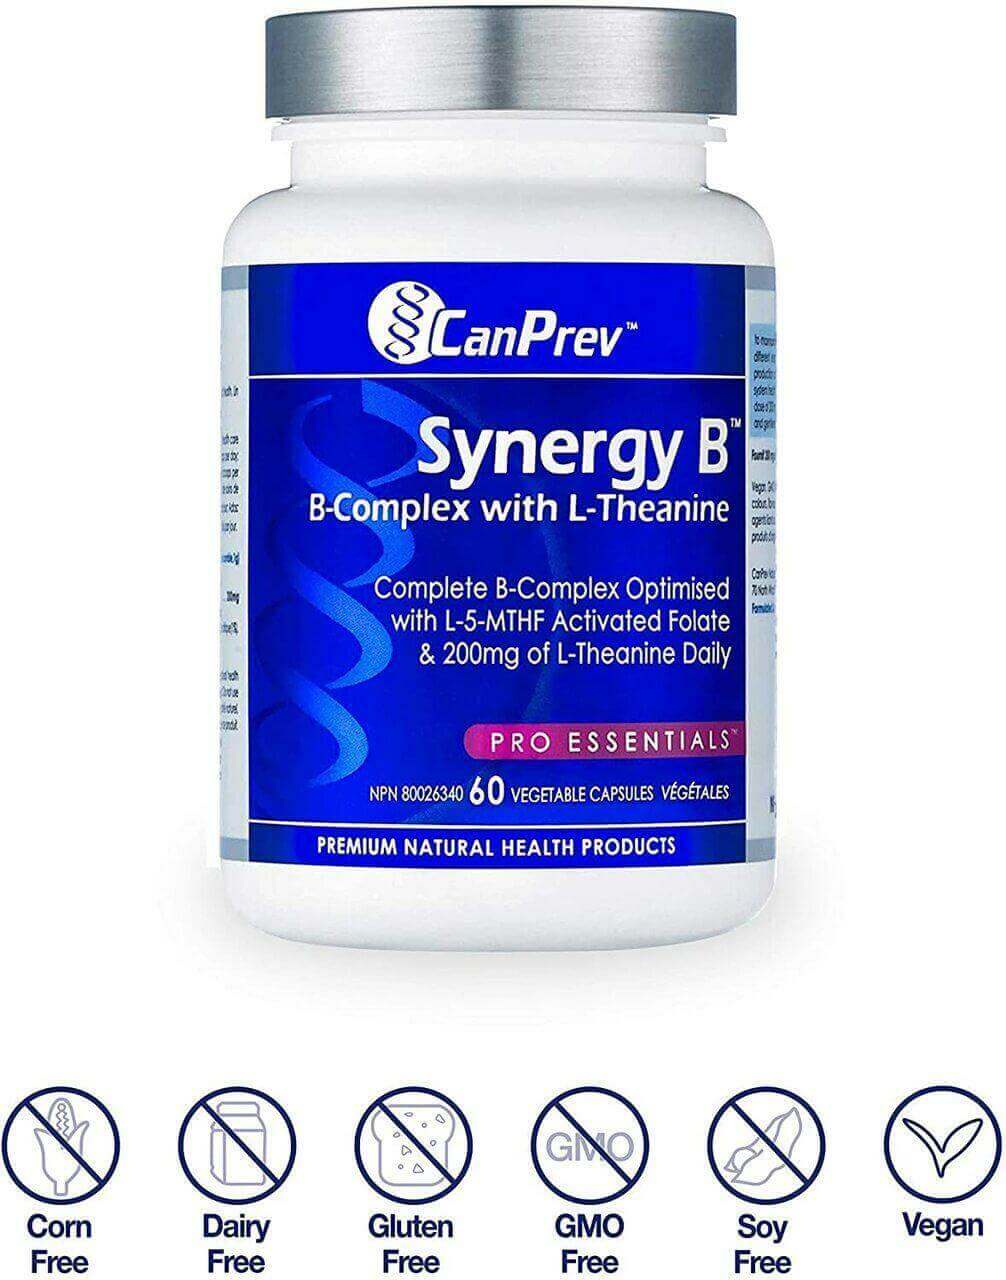 CanPrev Synergy B B-Complex with L-Theanine 60 Veg Capsules - Nutrition Plus